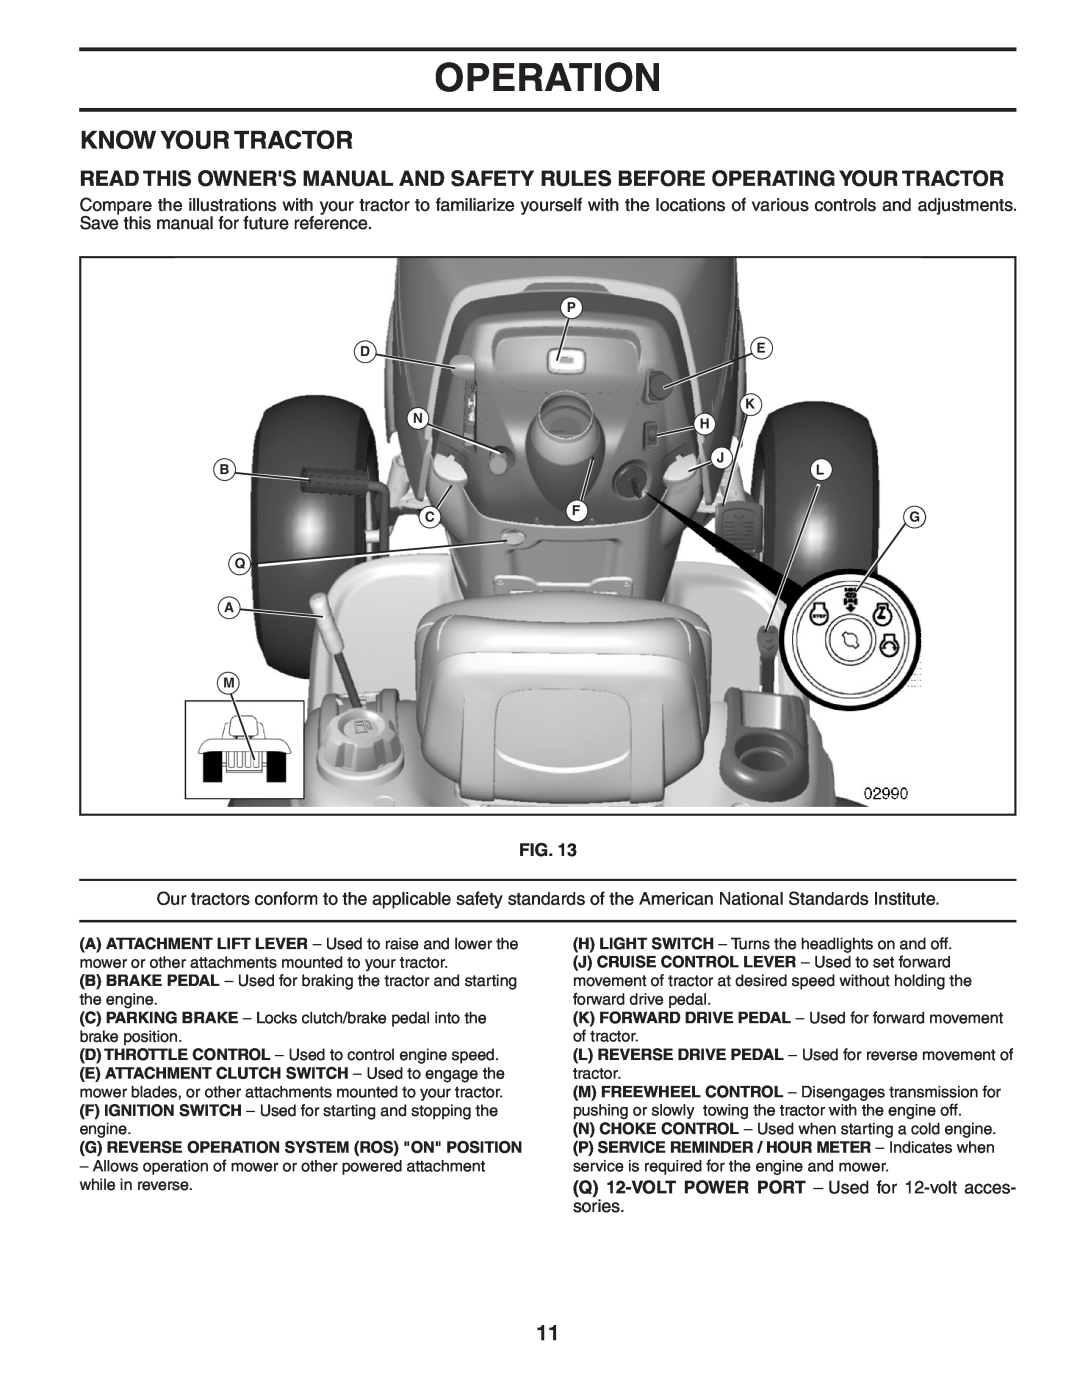 Poulan 402464 manual Know Your Tractor, Operation 